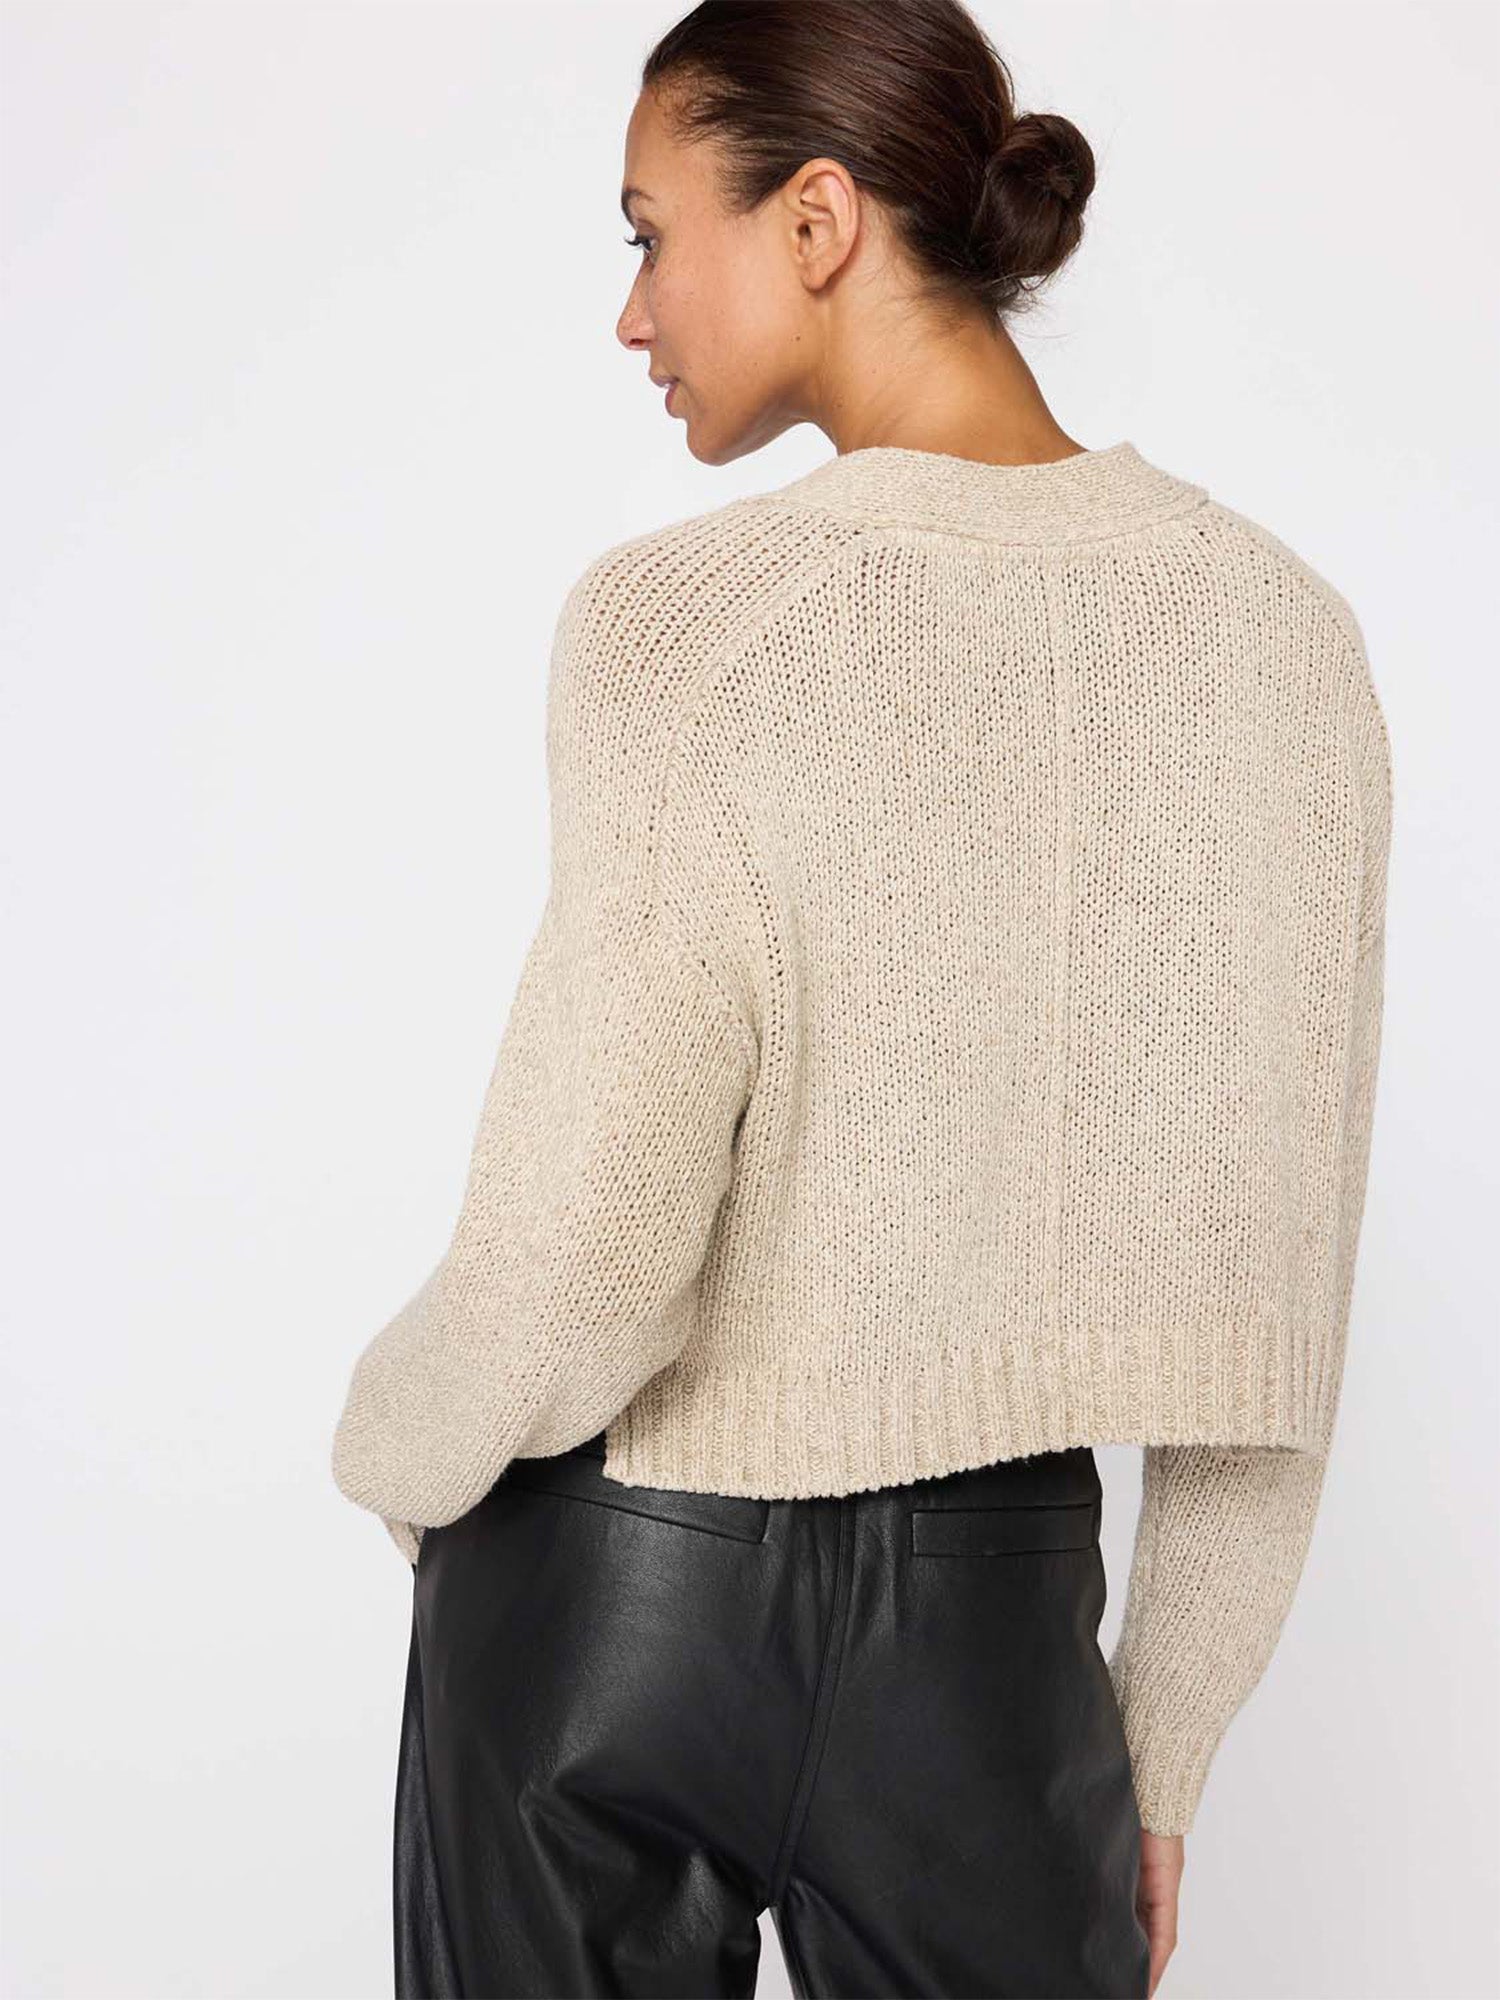 Cropped beige linen cotton cardigan sweater back view